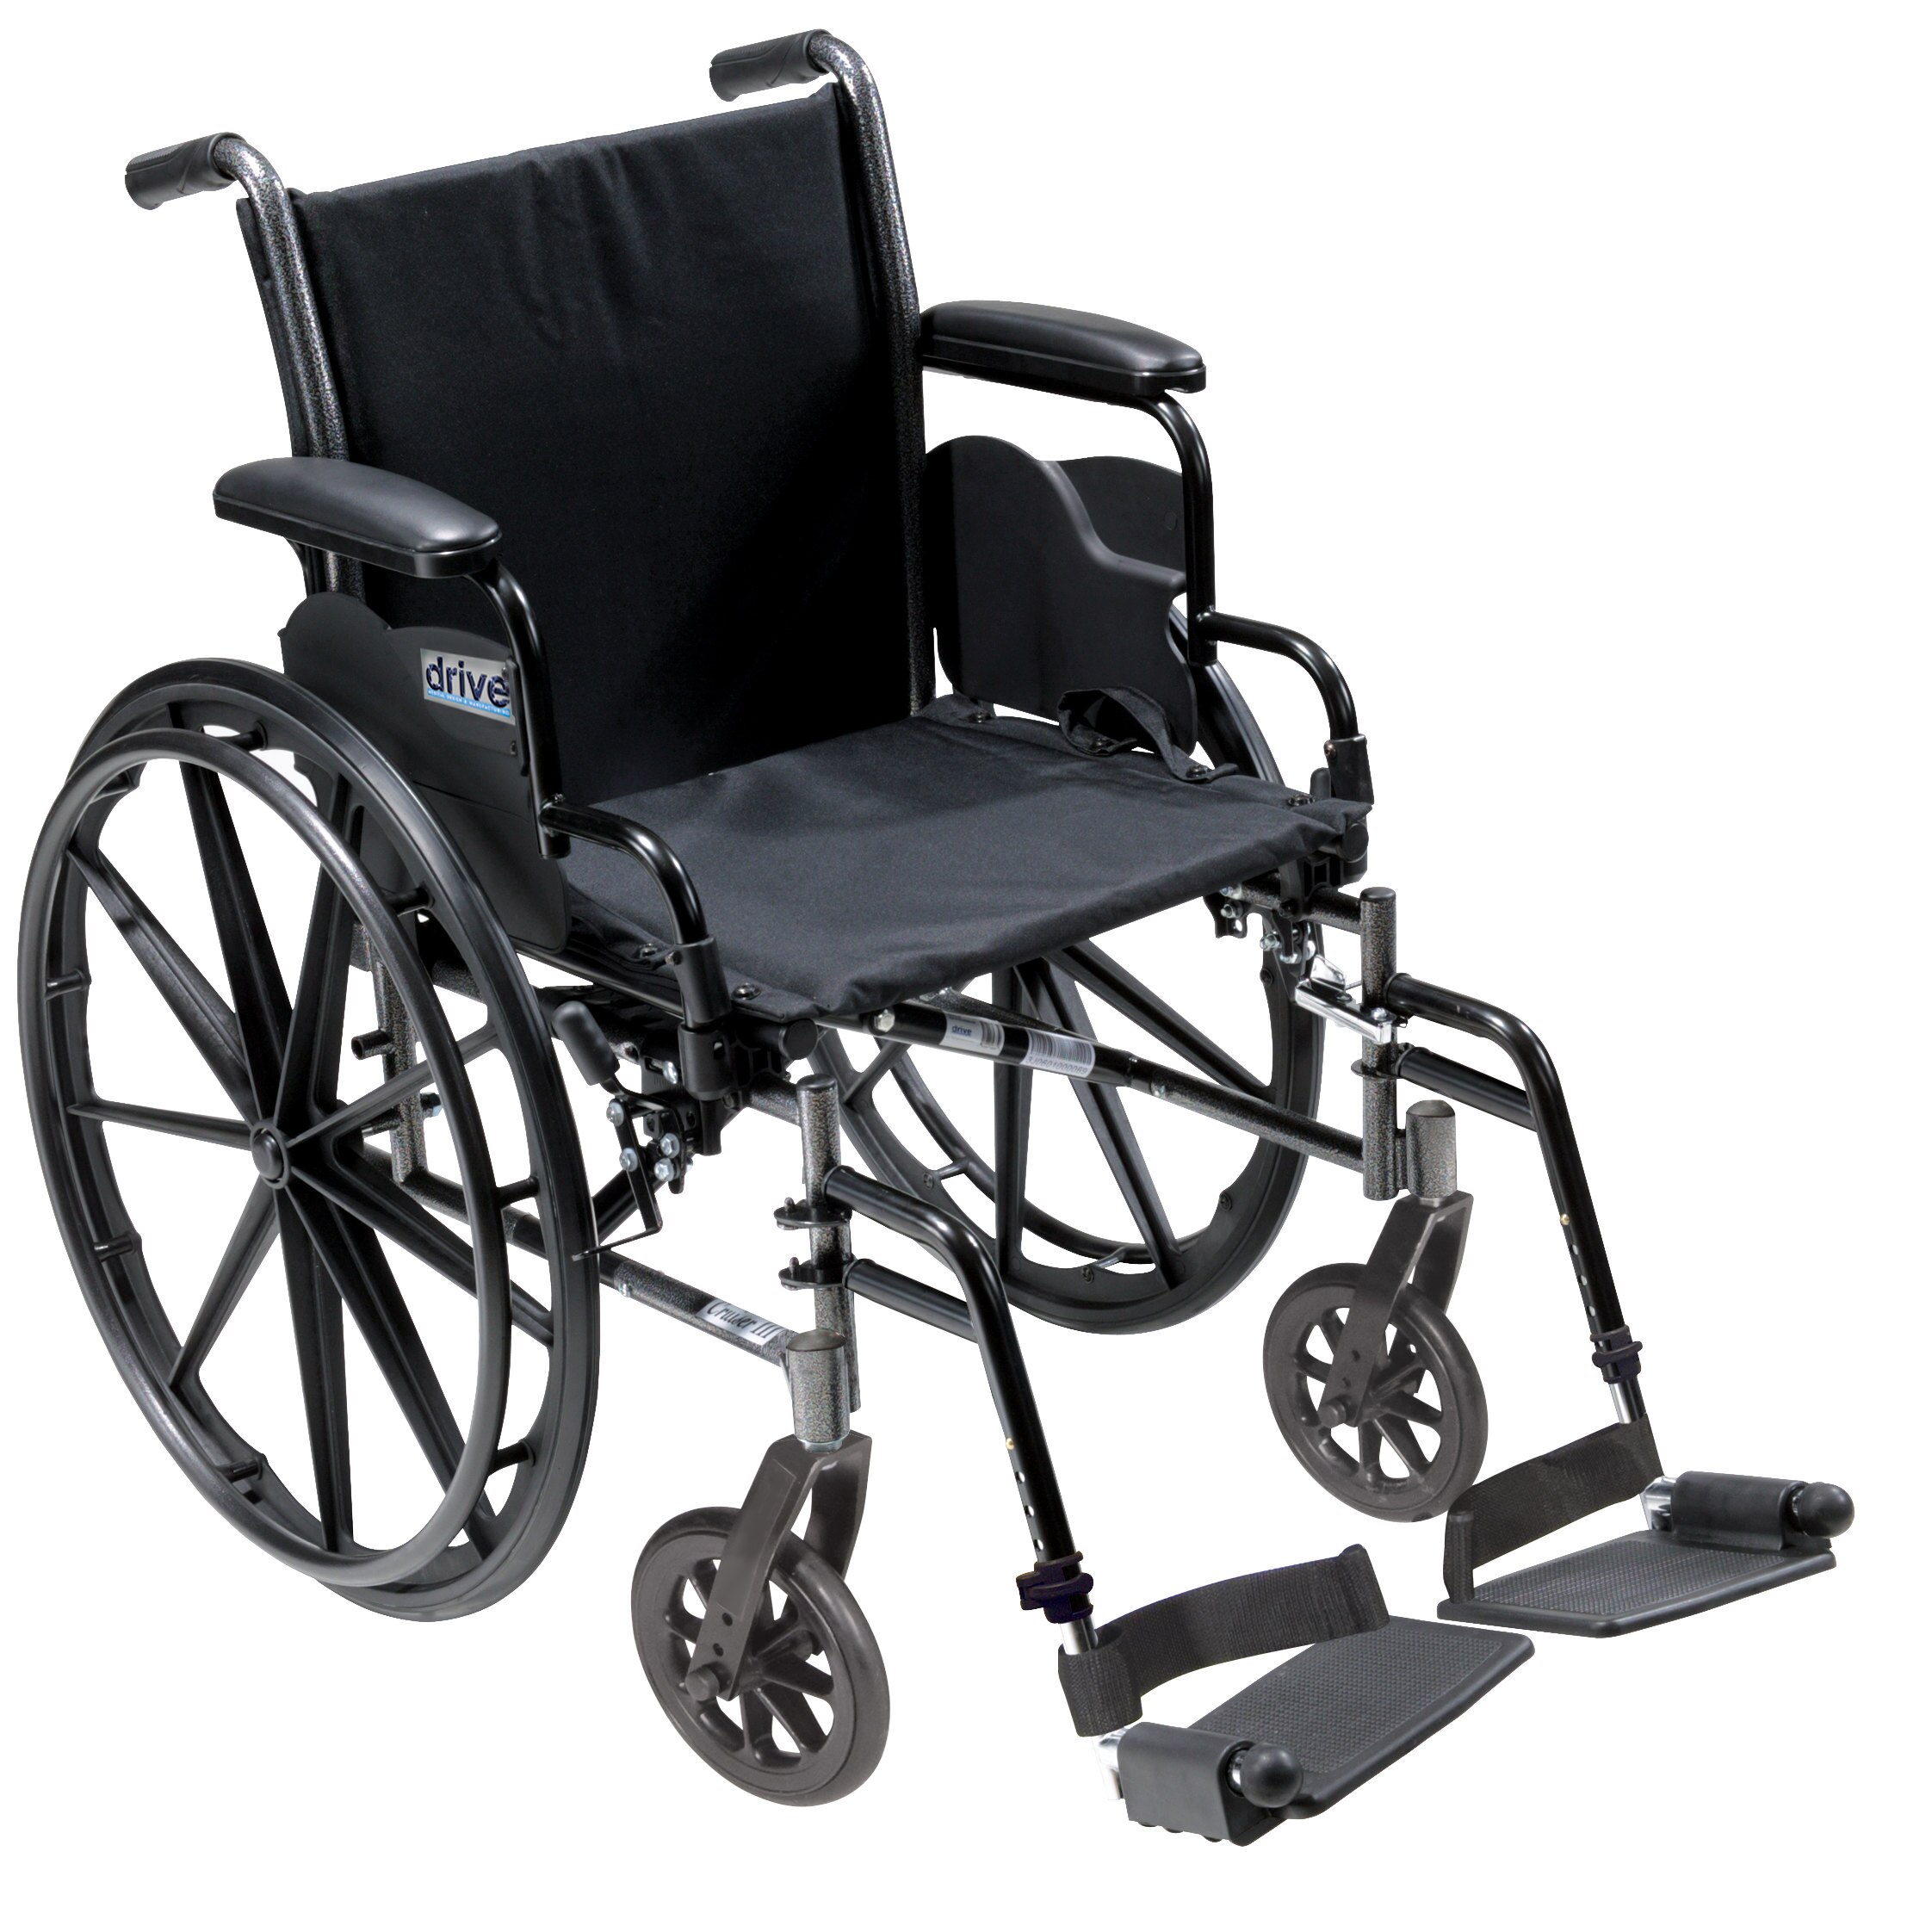 Drive Medical Cruiser III Wheelchair with Flip Back Removable Desk Arms, Footrests